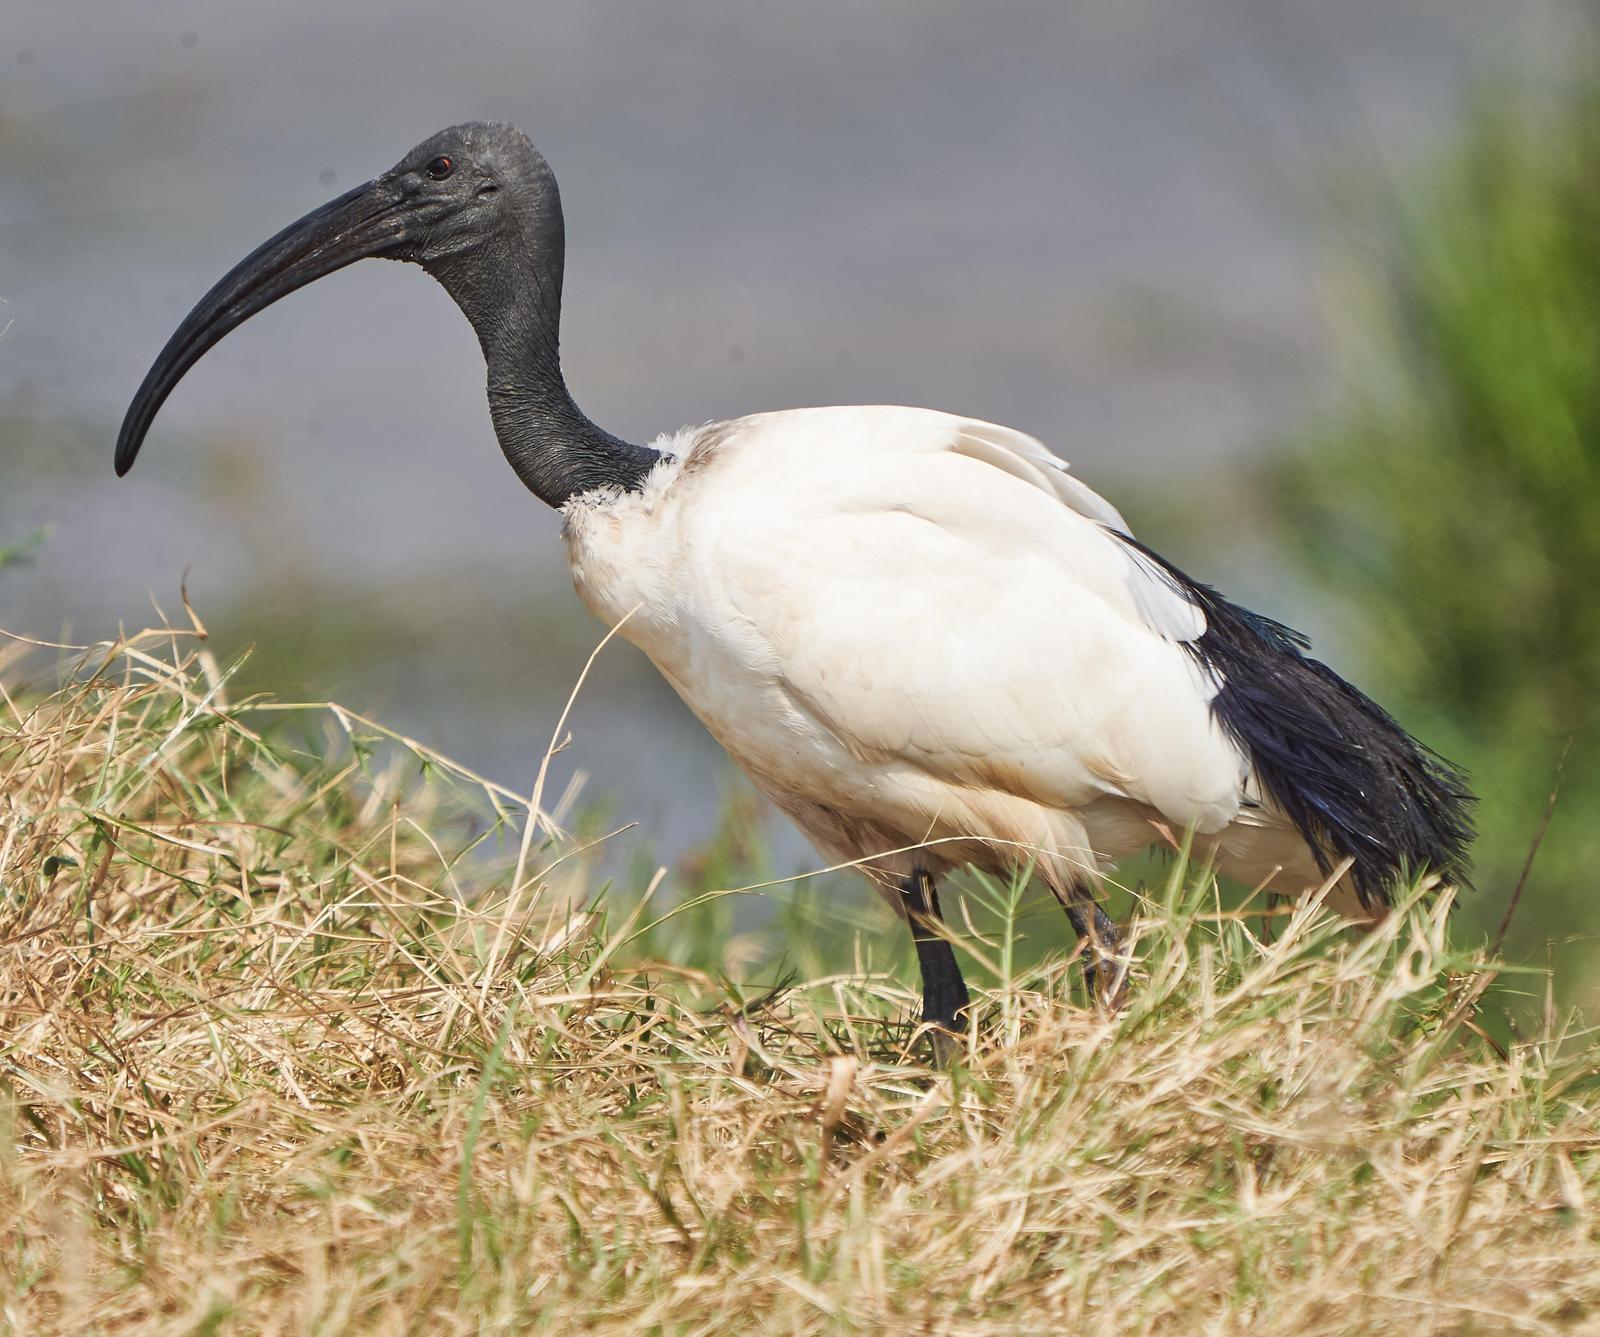 African Sacred Ibis Photo by Steven Cheong